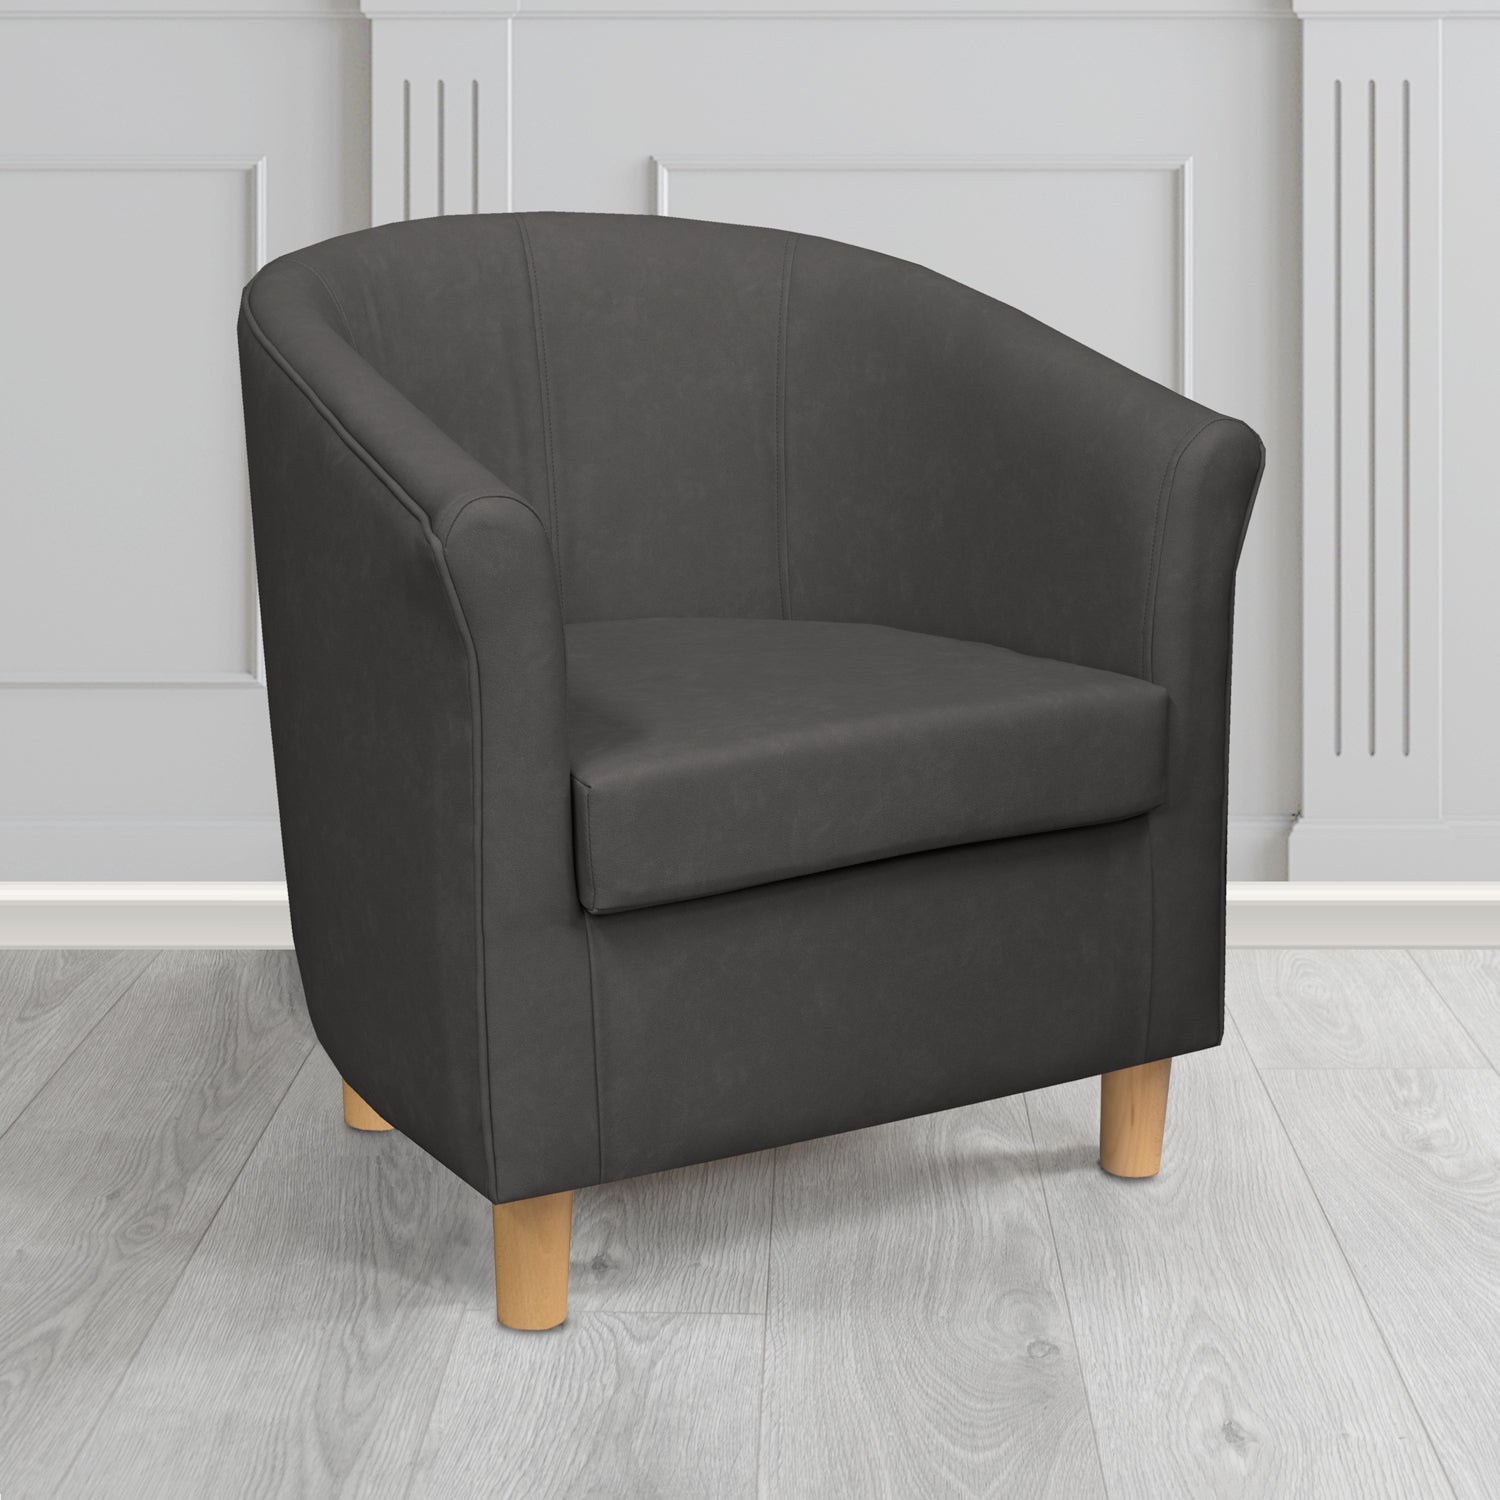 Tuscany Tub Chair in Infiniti Anthracite INF1862 Antimicrobial Crib 5 Faux Leather - The Tub Chair Shop